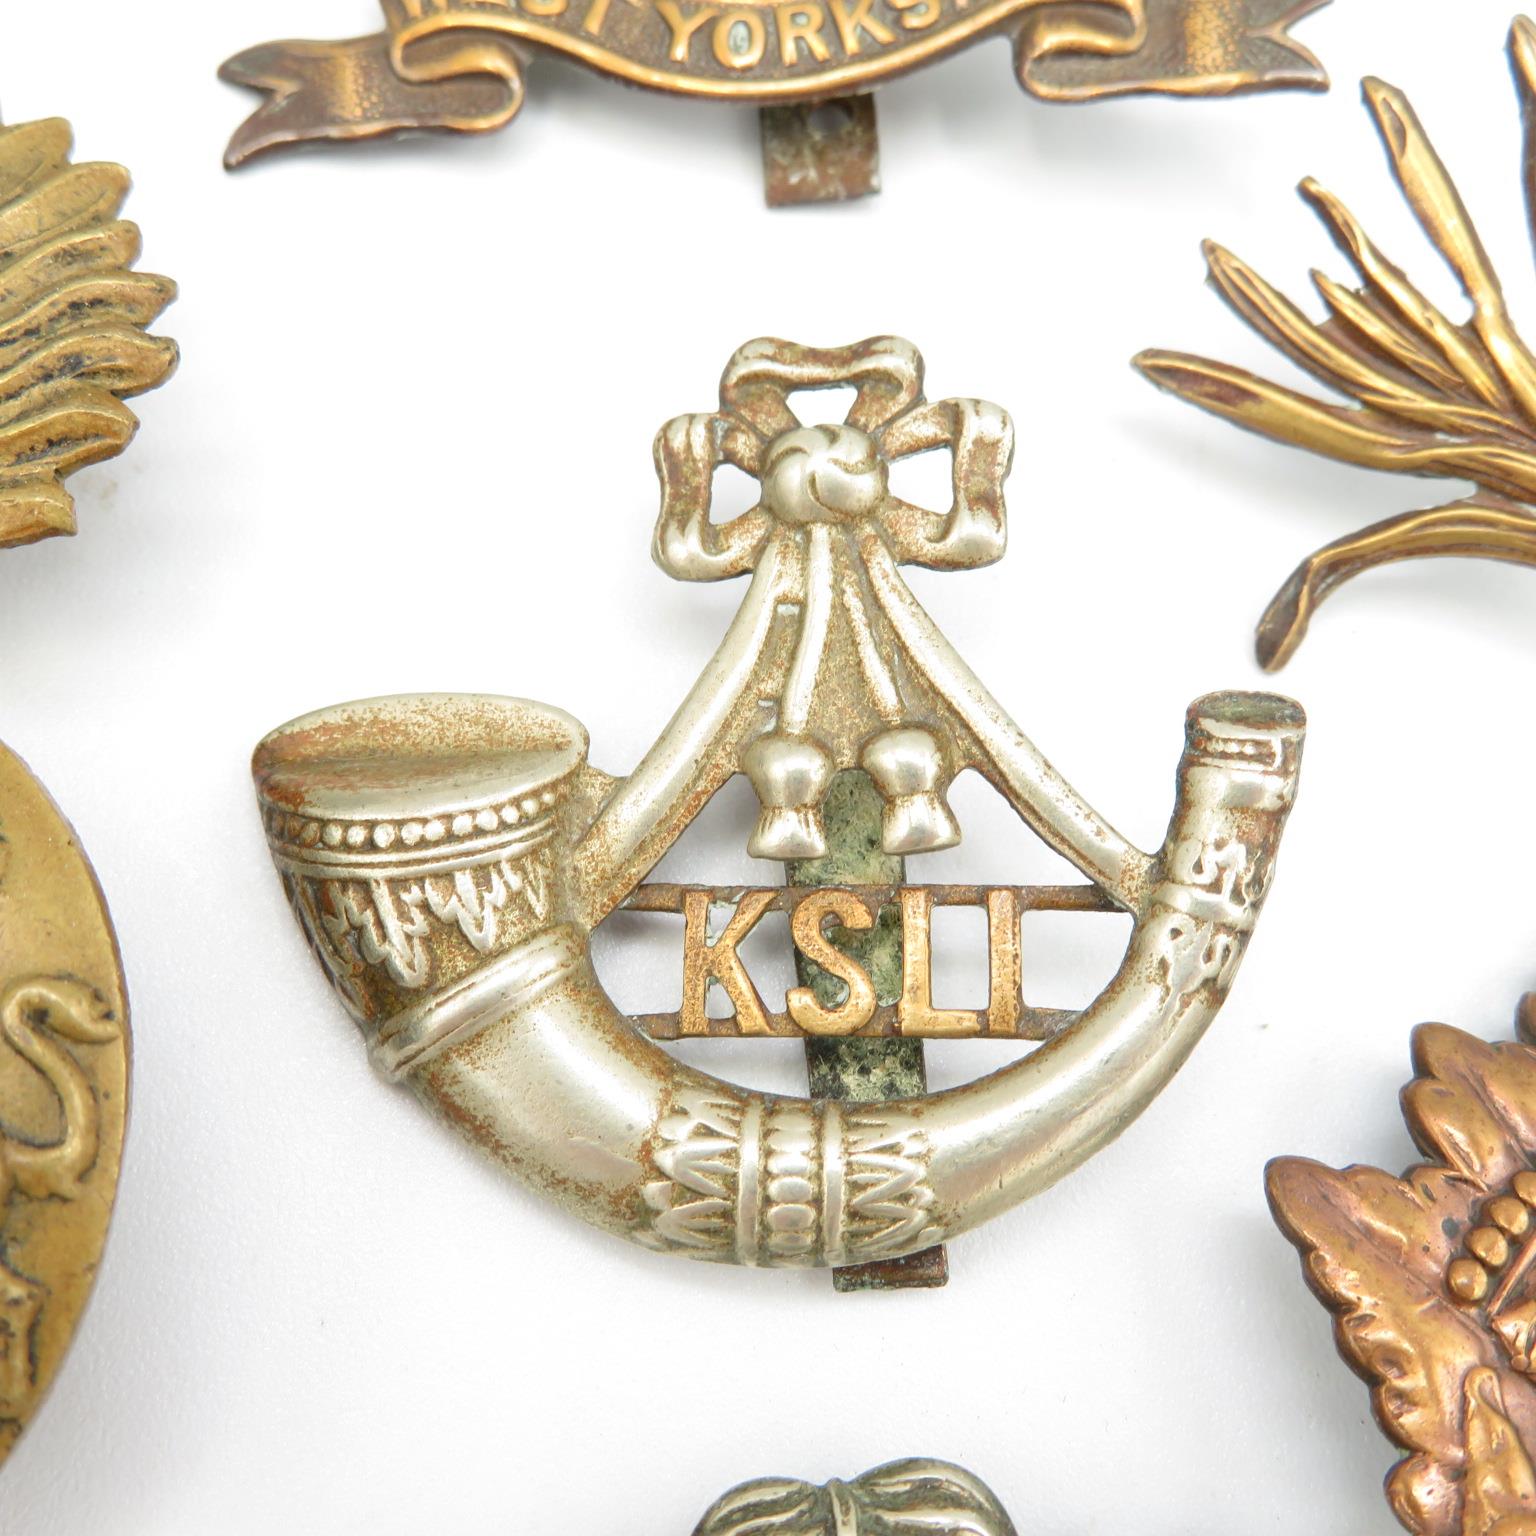 18x Military cap badges including Royal Scots Fusiliers and Lancers etc. - - Image 10 of 19